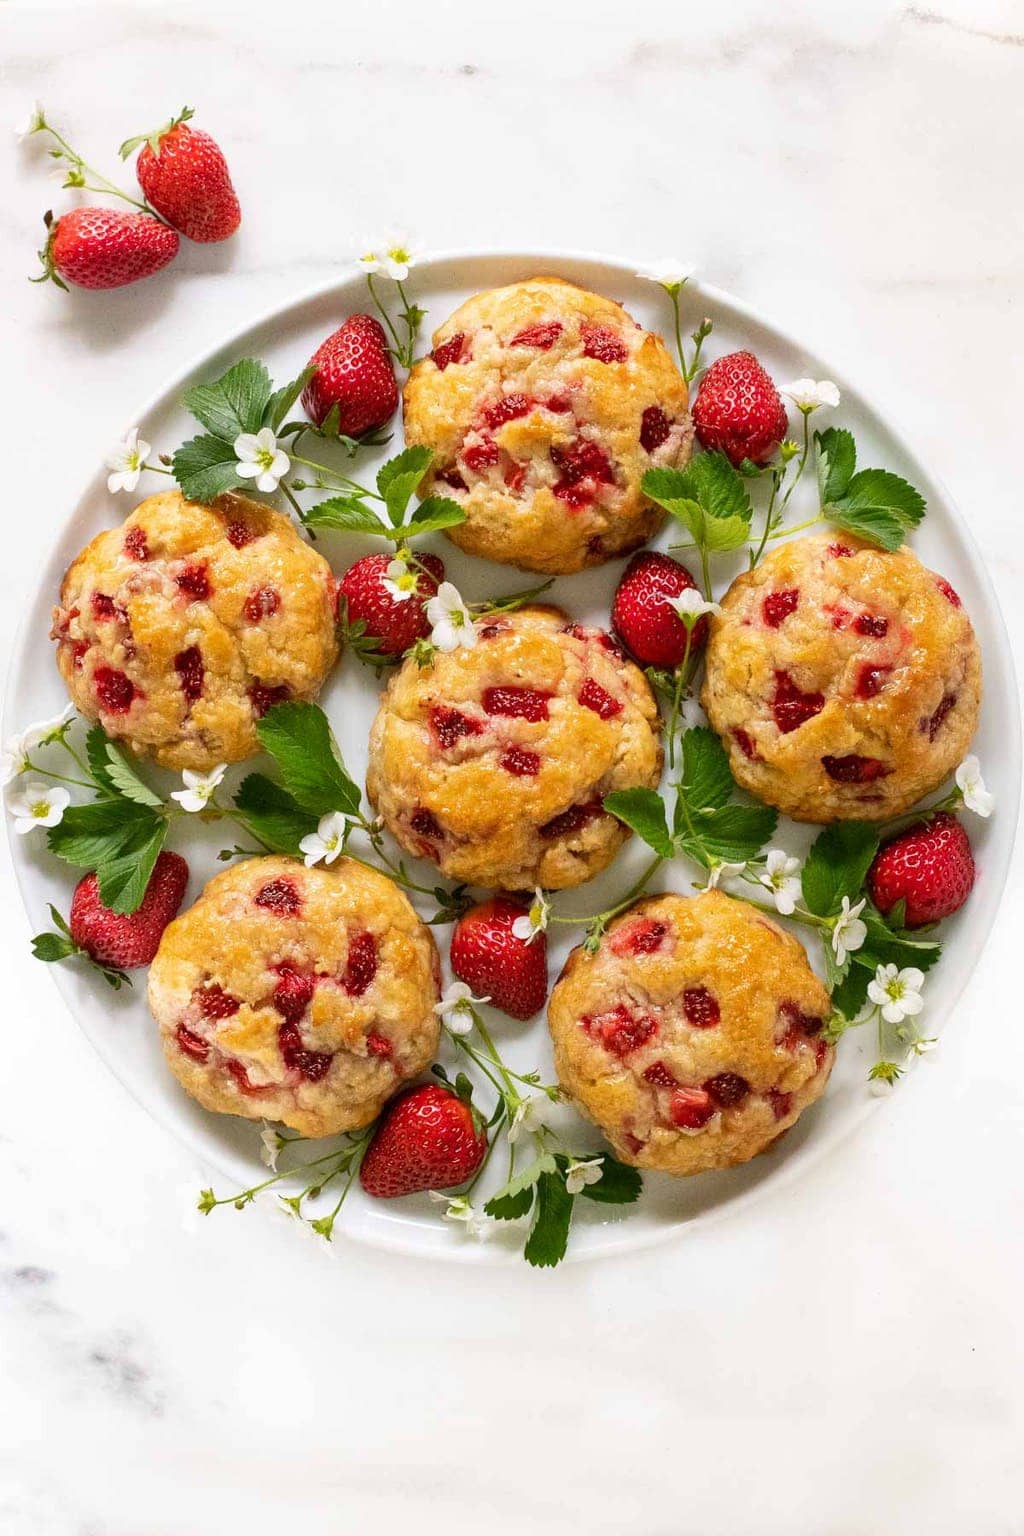 Vertical overhead photo of a white round platter of Ridiculously Easy Fresh Strawberry Scones garnished with strawberry leaves and flowers.